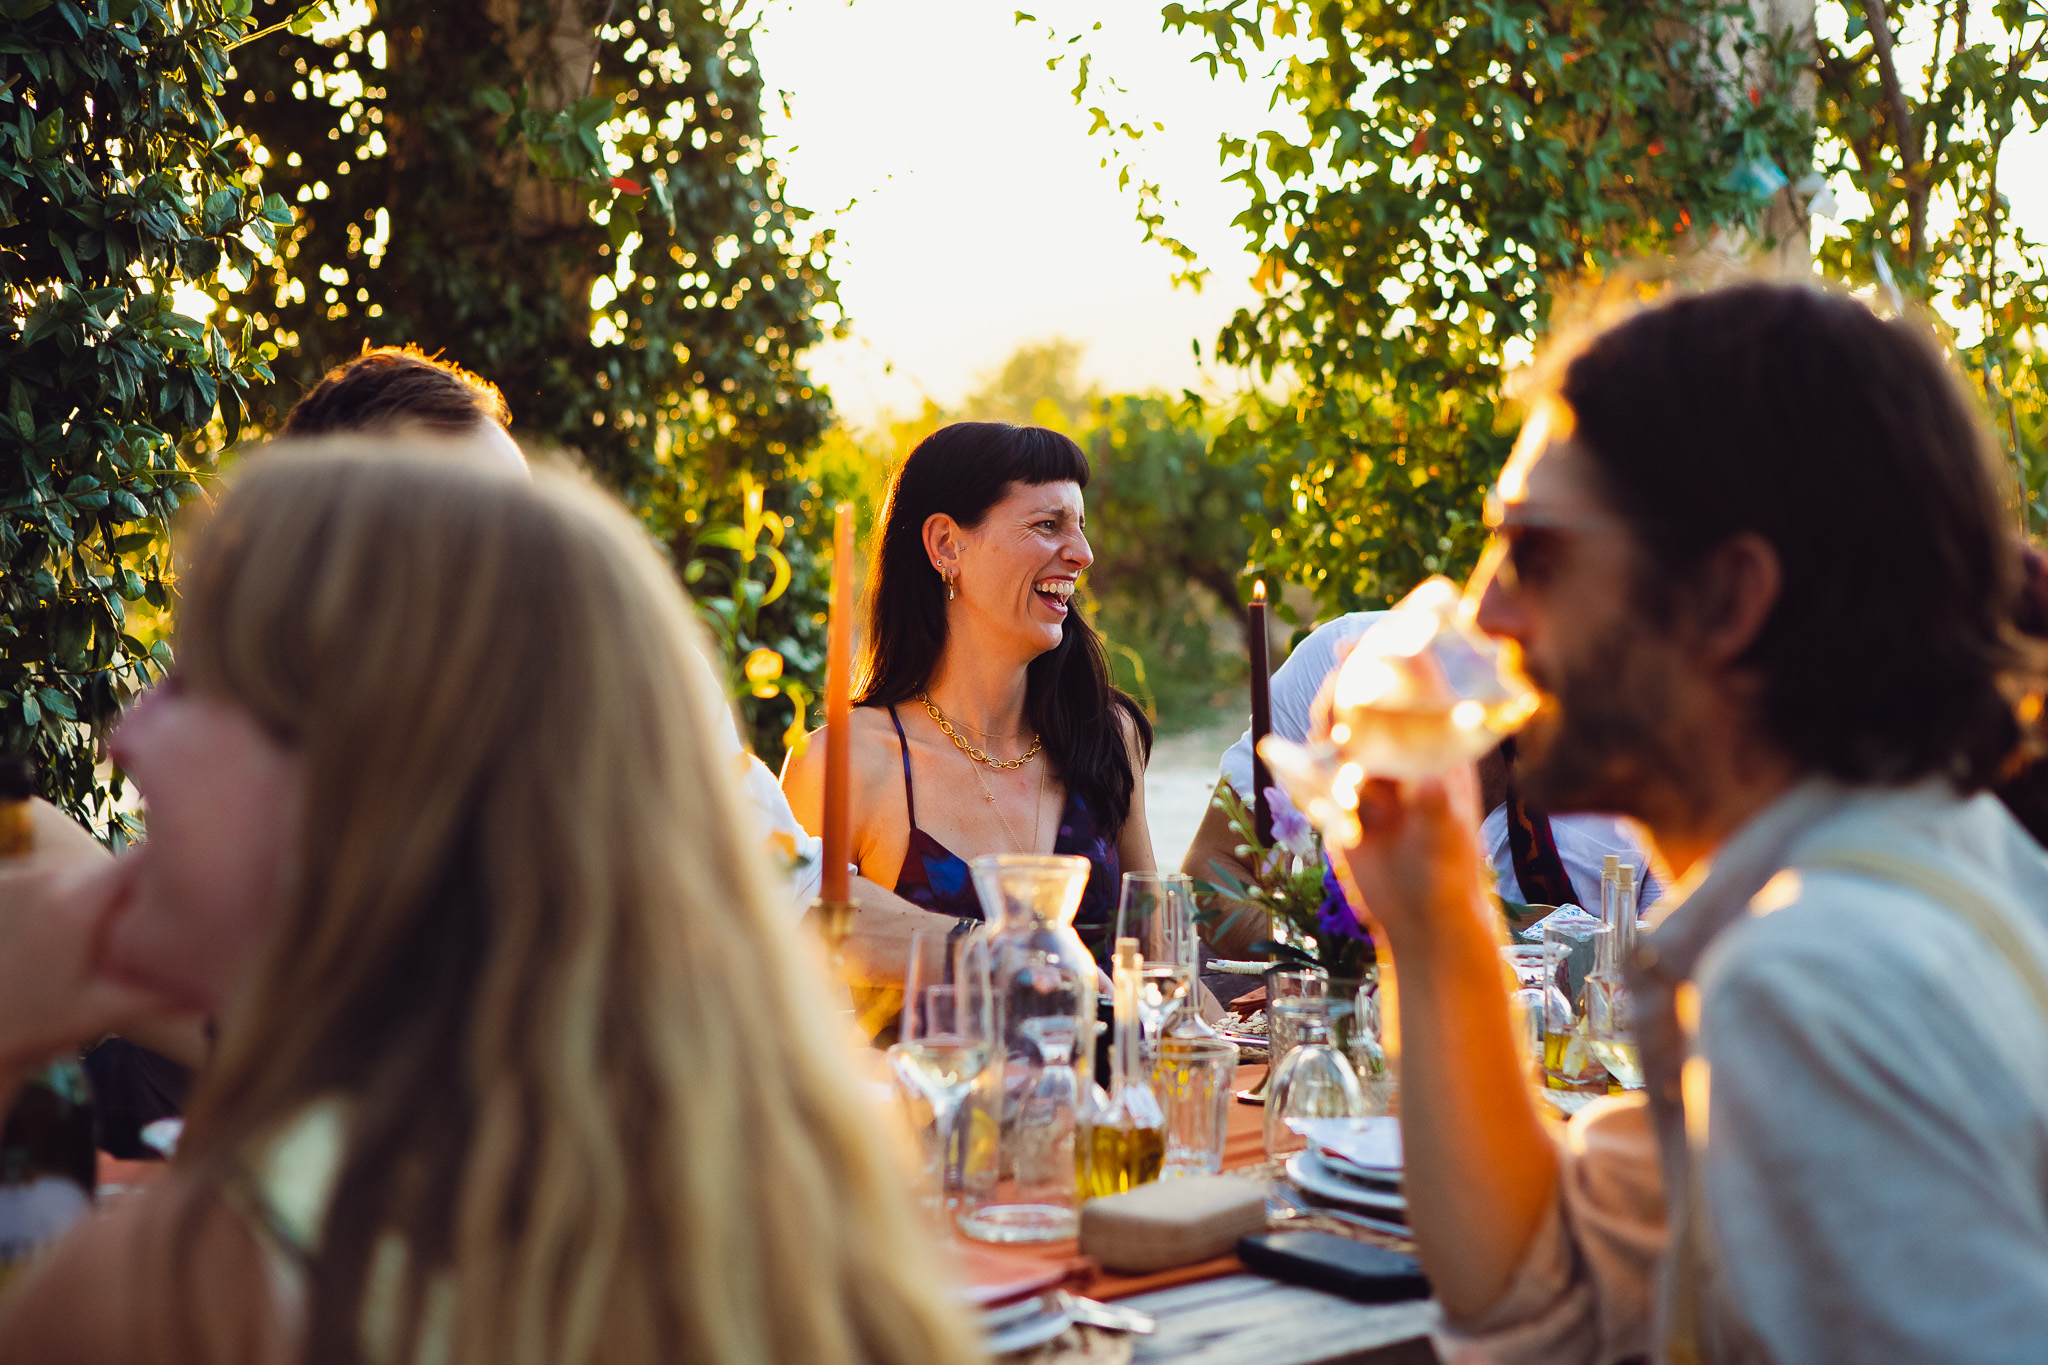 Wedding guest laughs as the sun sets during the dinner and speeches in Ambelonas Vineyard, Corfu